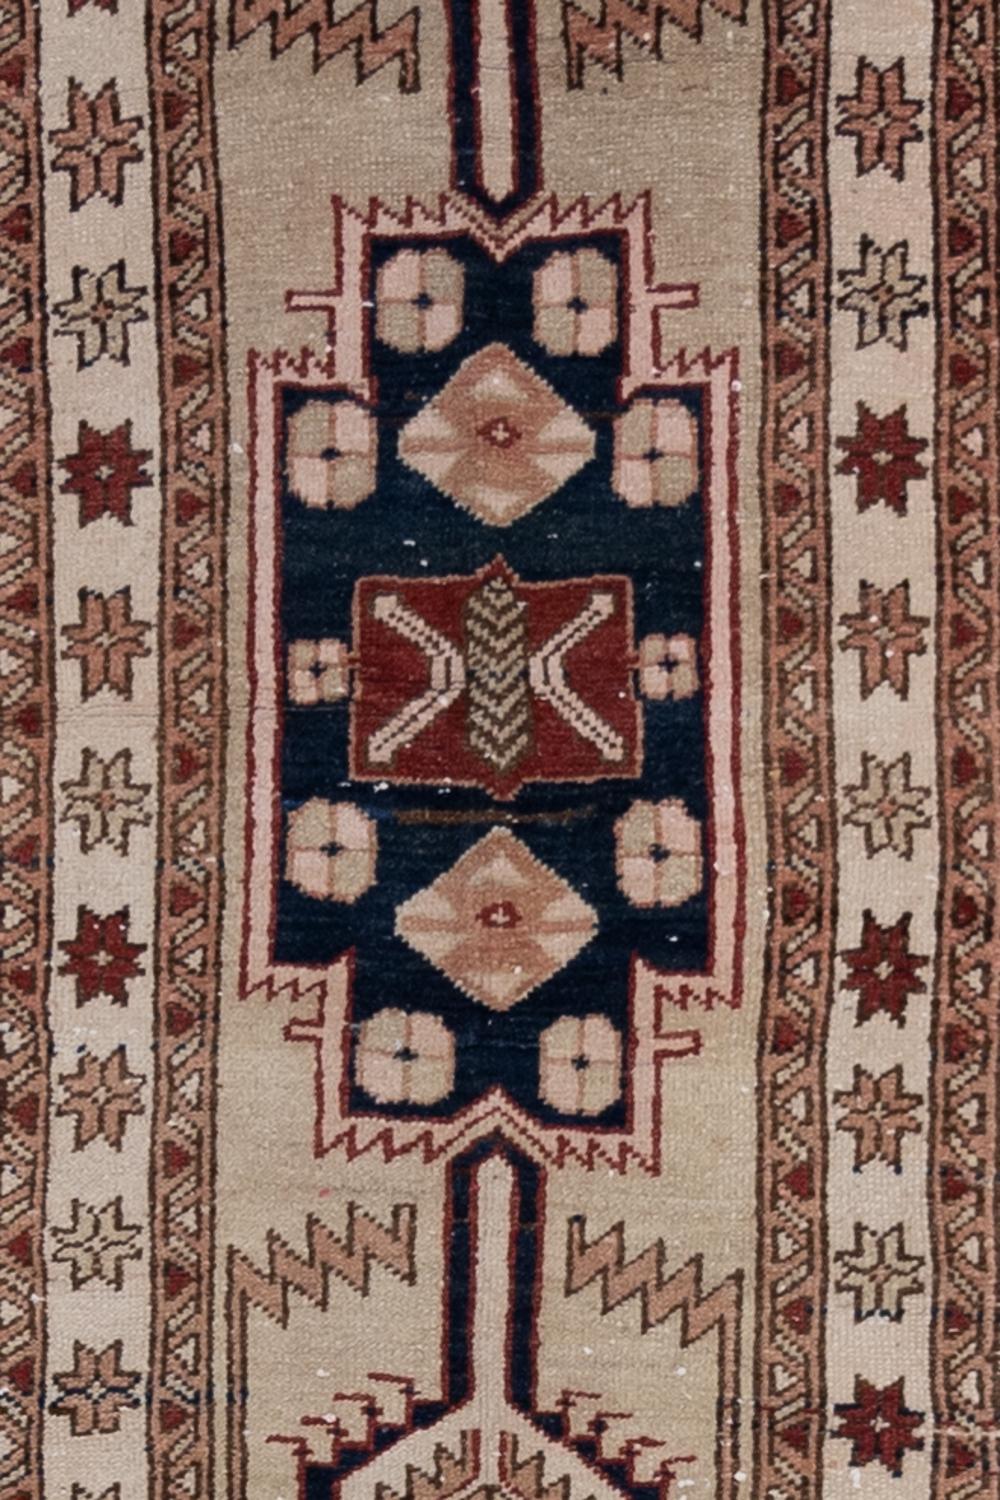 Age: early 20th century

Colors: pale camel, oxblood, navy blue, faded salmon

Pile: medium 

Wear Notes: 2

Material: wool on wool

Gorgeous antique camel field runner with a soft wool pile and earthy accent colors. This piece adds a